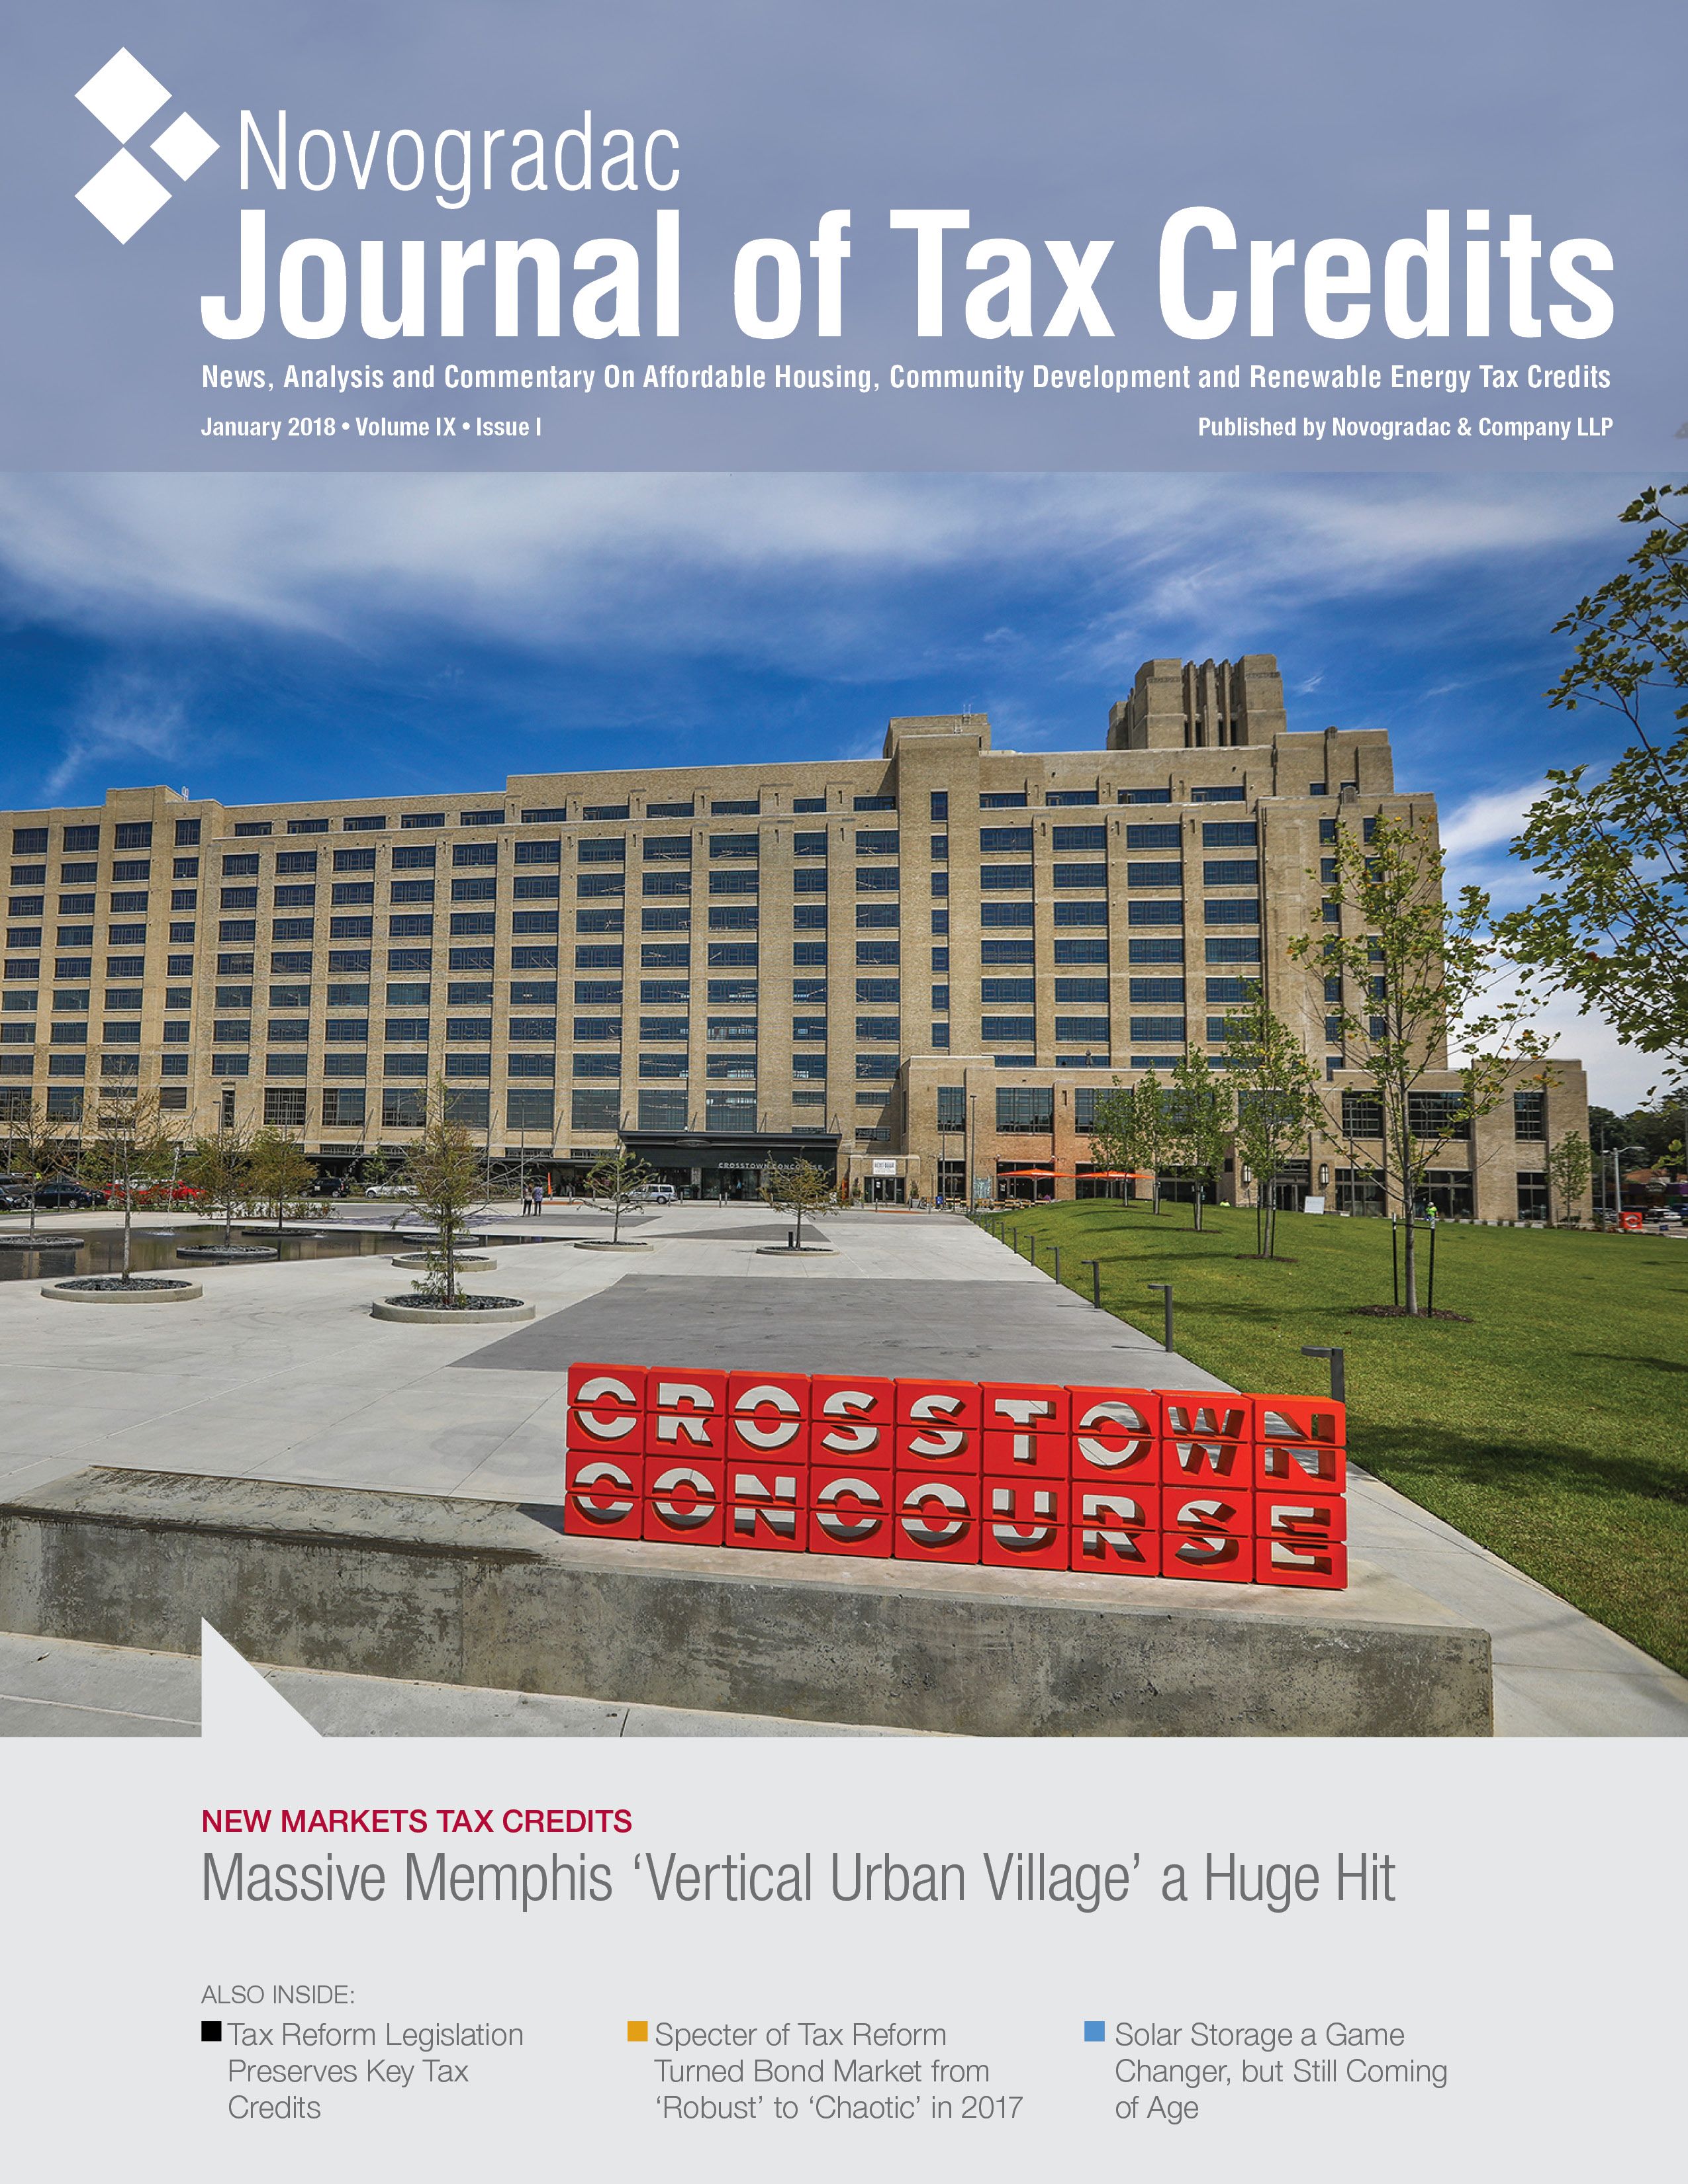 Crosstown_Concourse_JTC_Article_January_2018_Cover.jpg